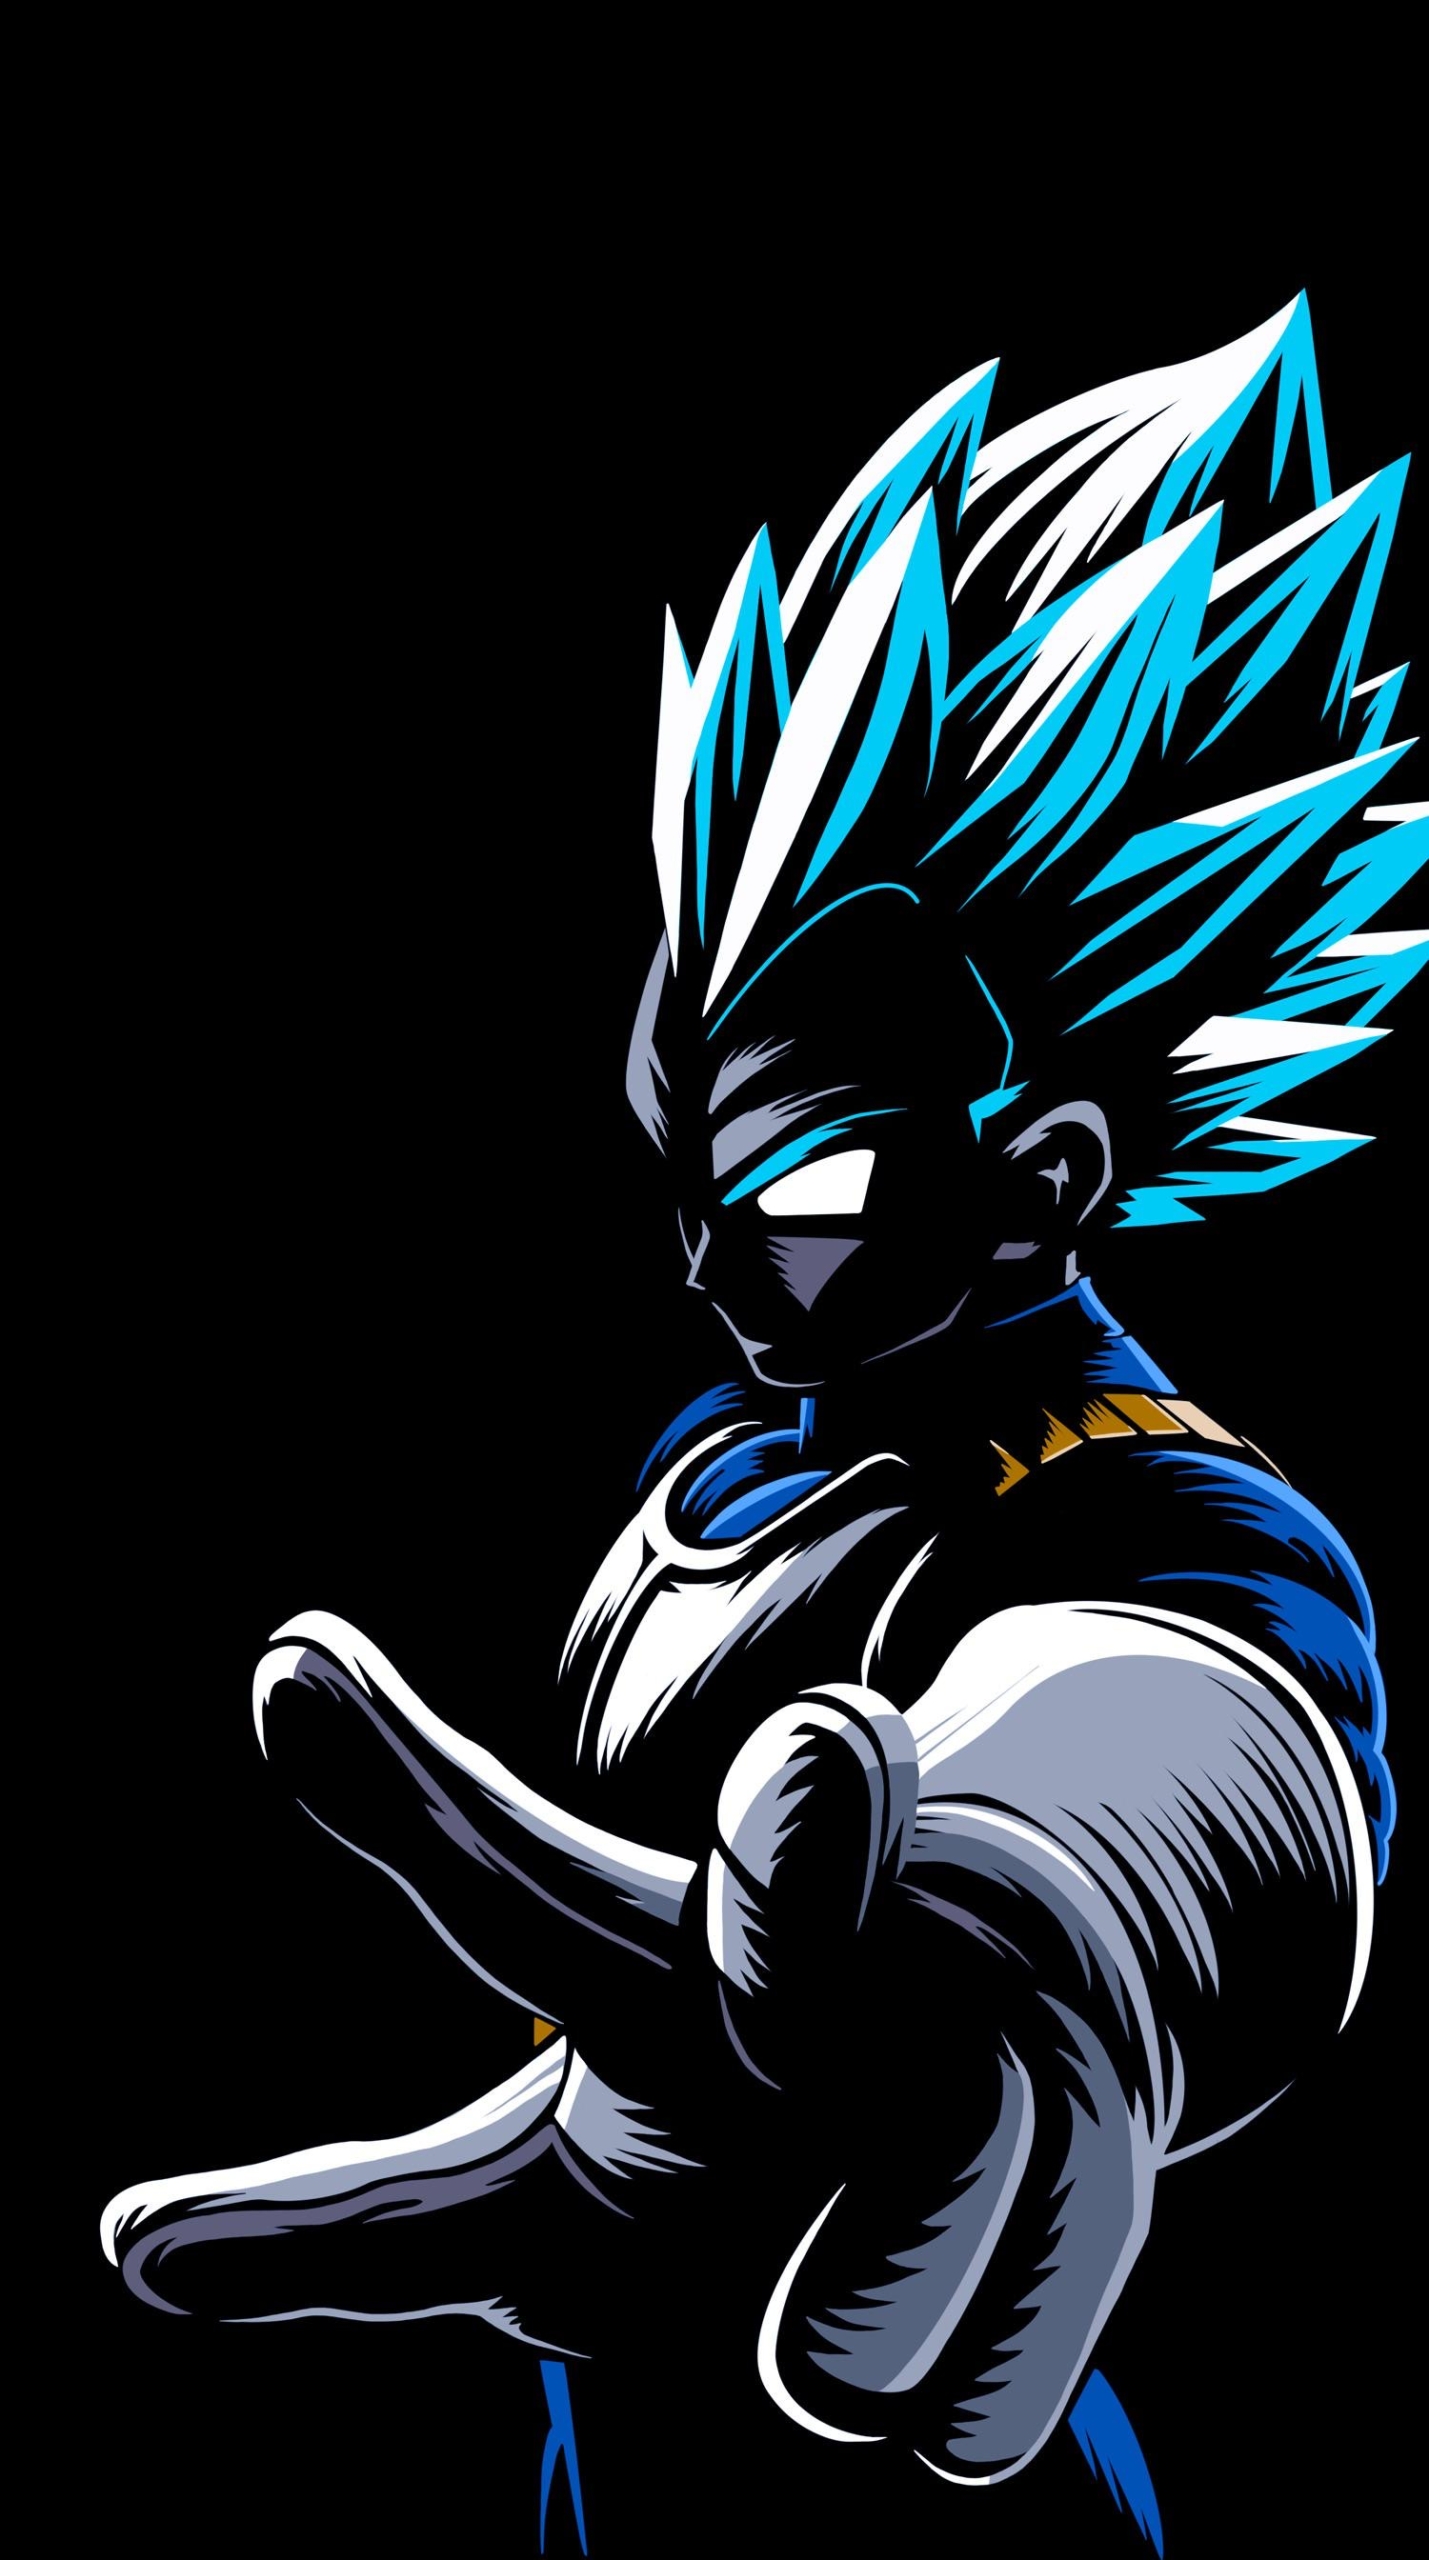 Vegeta Wallpaper For Android 76 images